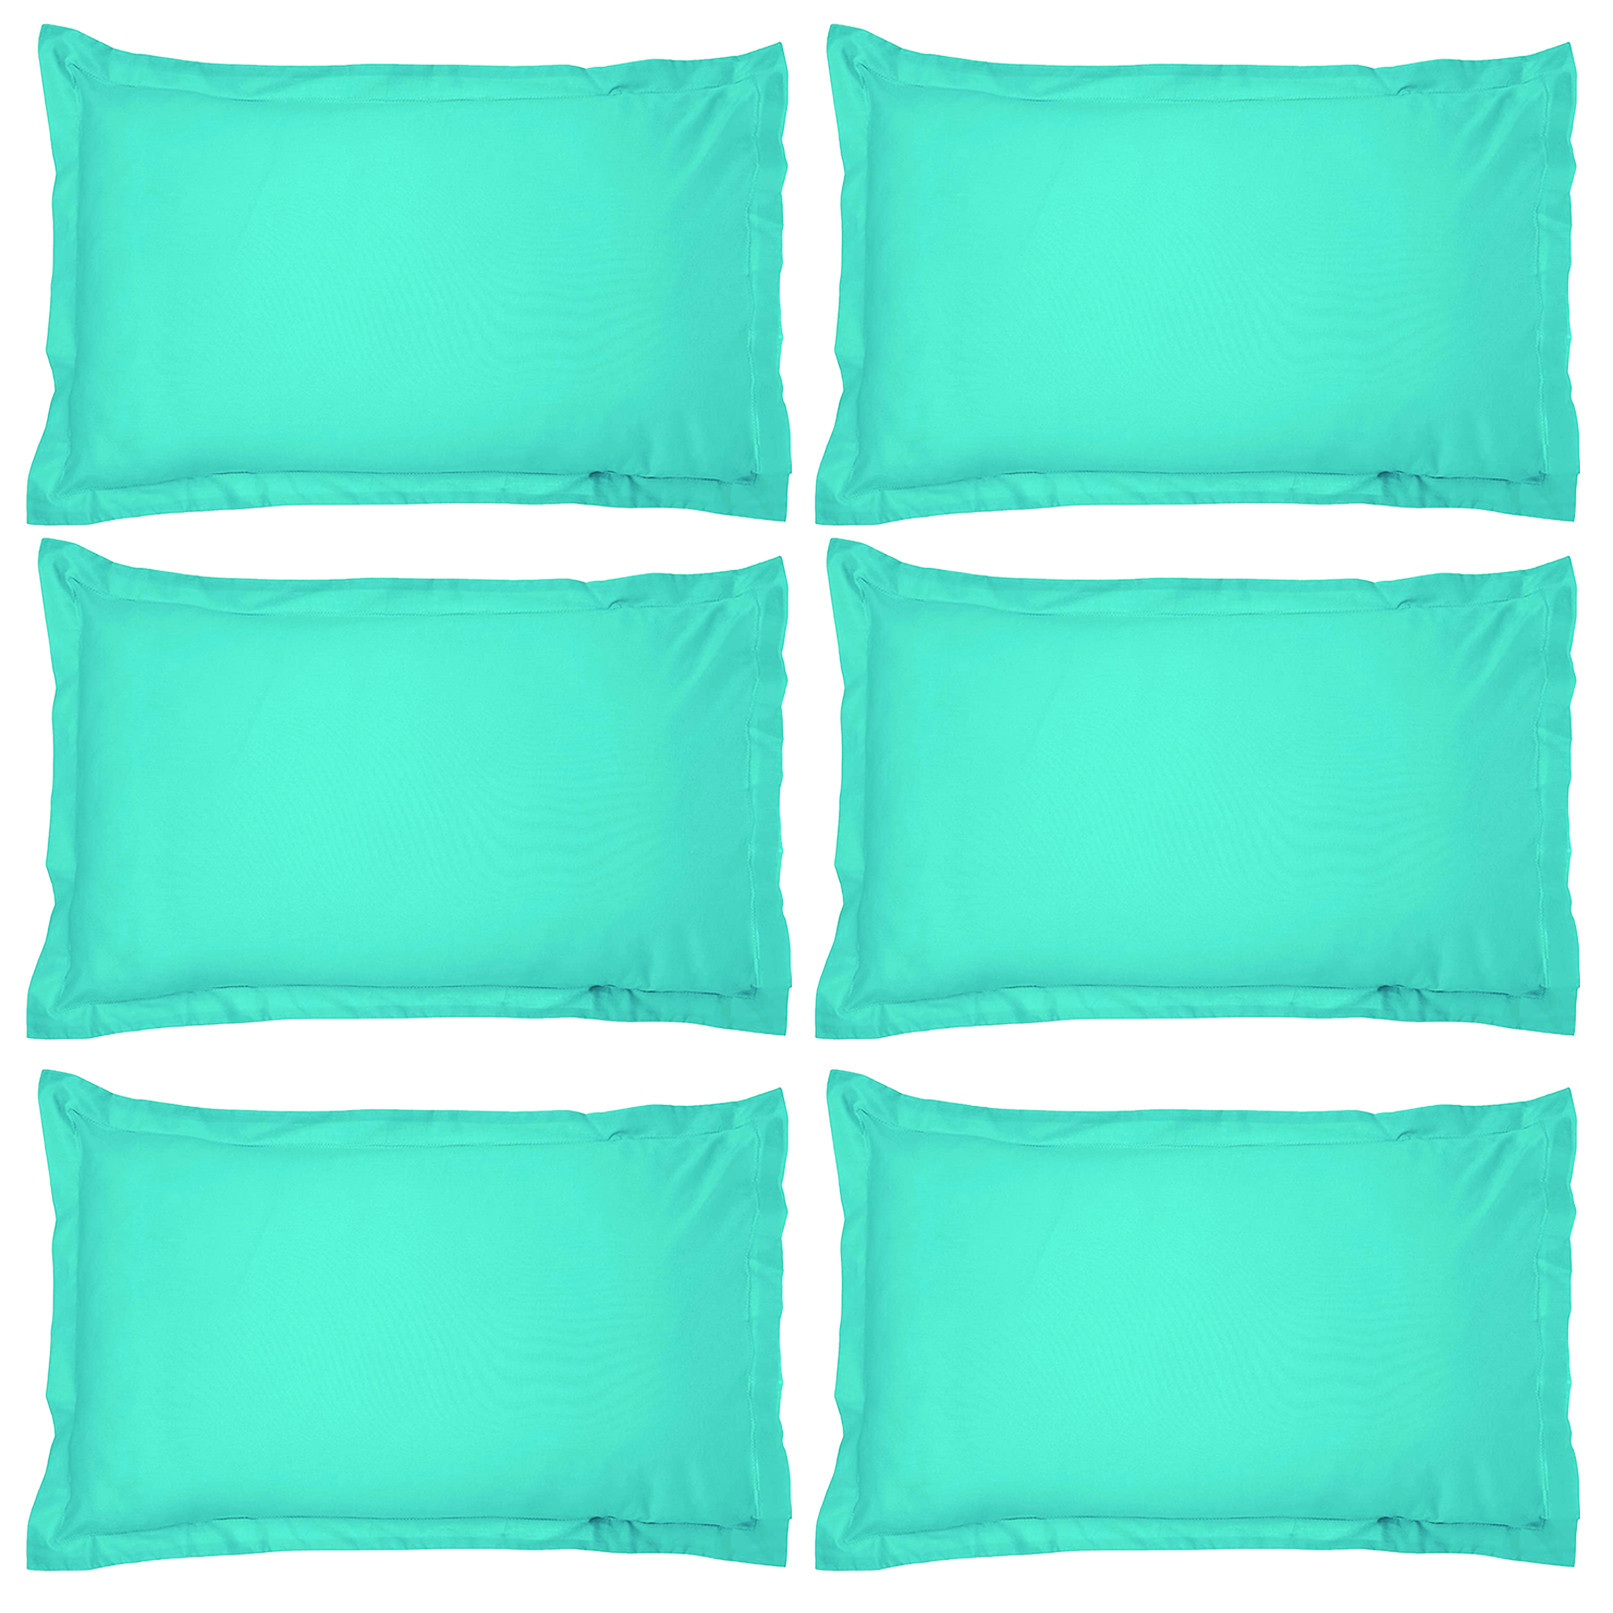 Kuber Industries Breathable & Soft Cotton Pillow Cover For Sofa, Couch, Bed - 29x20 Inch,(Green)